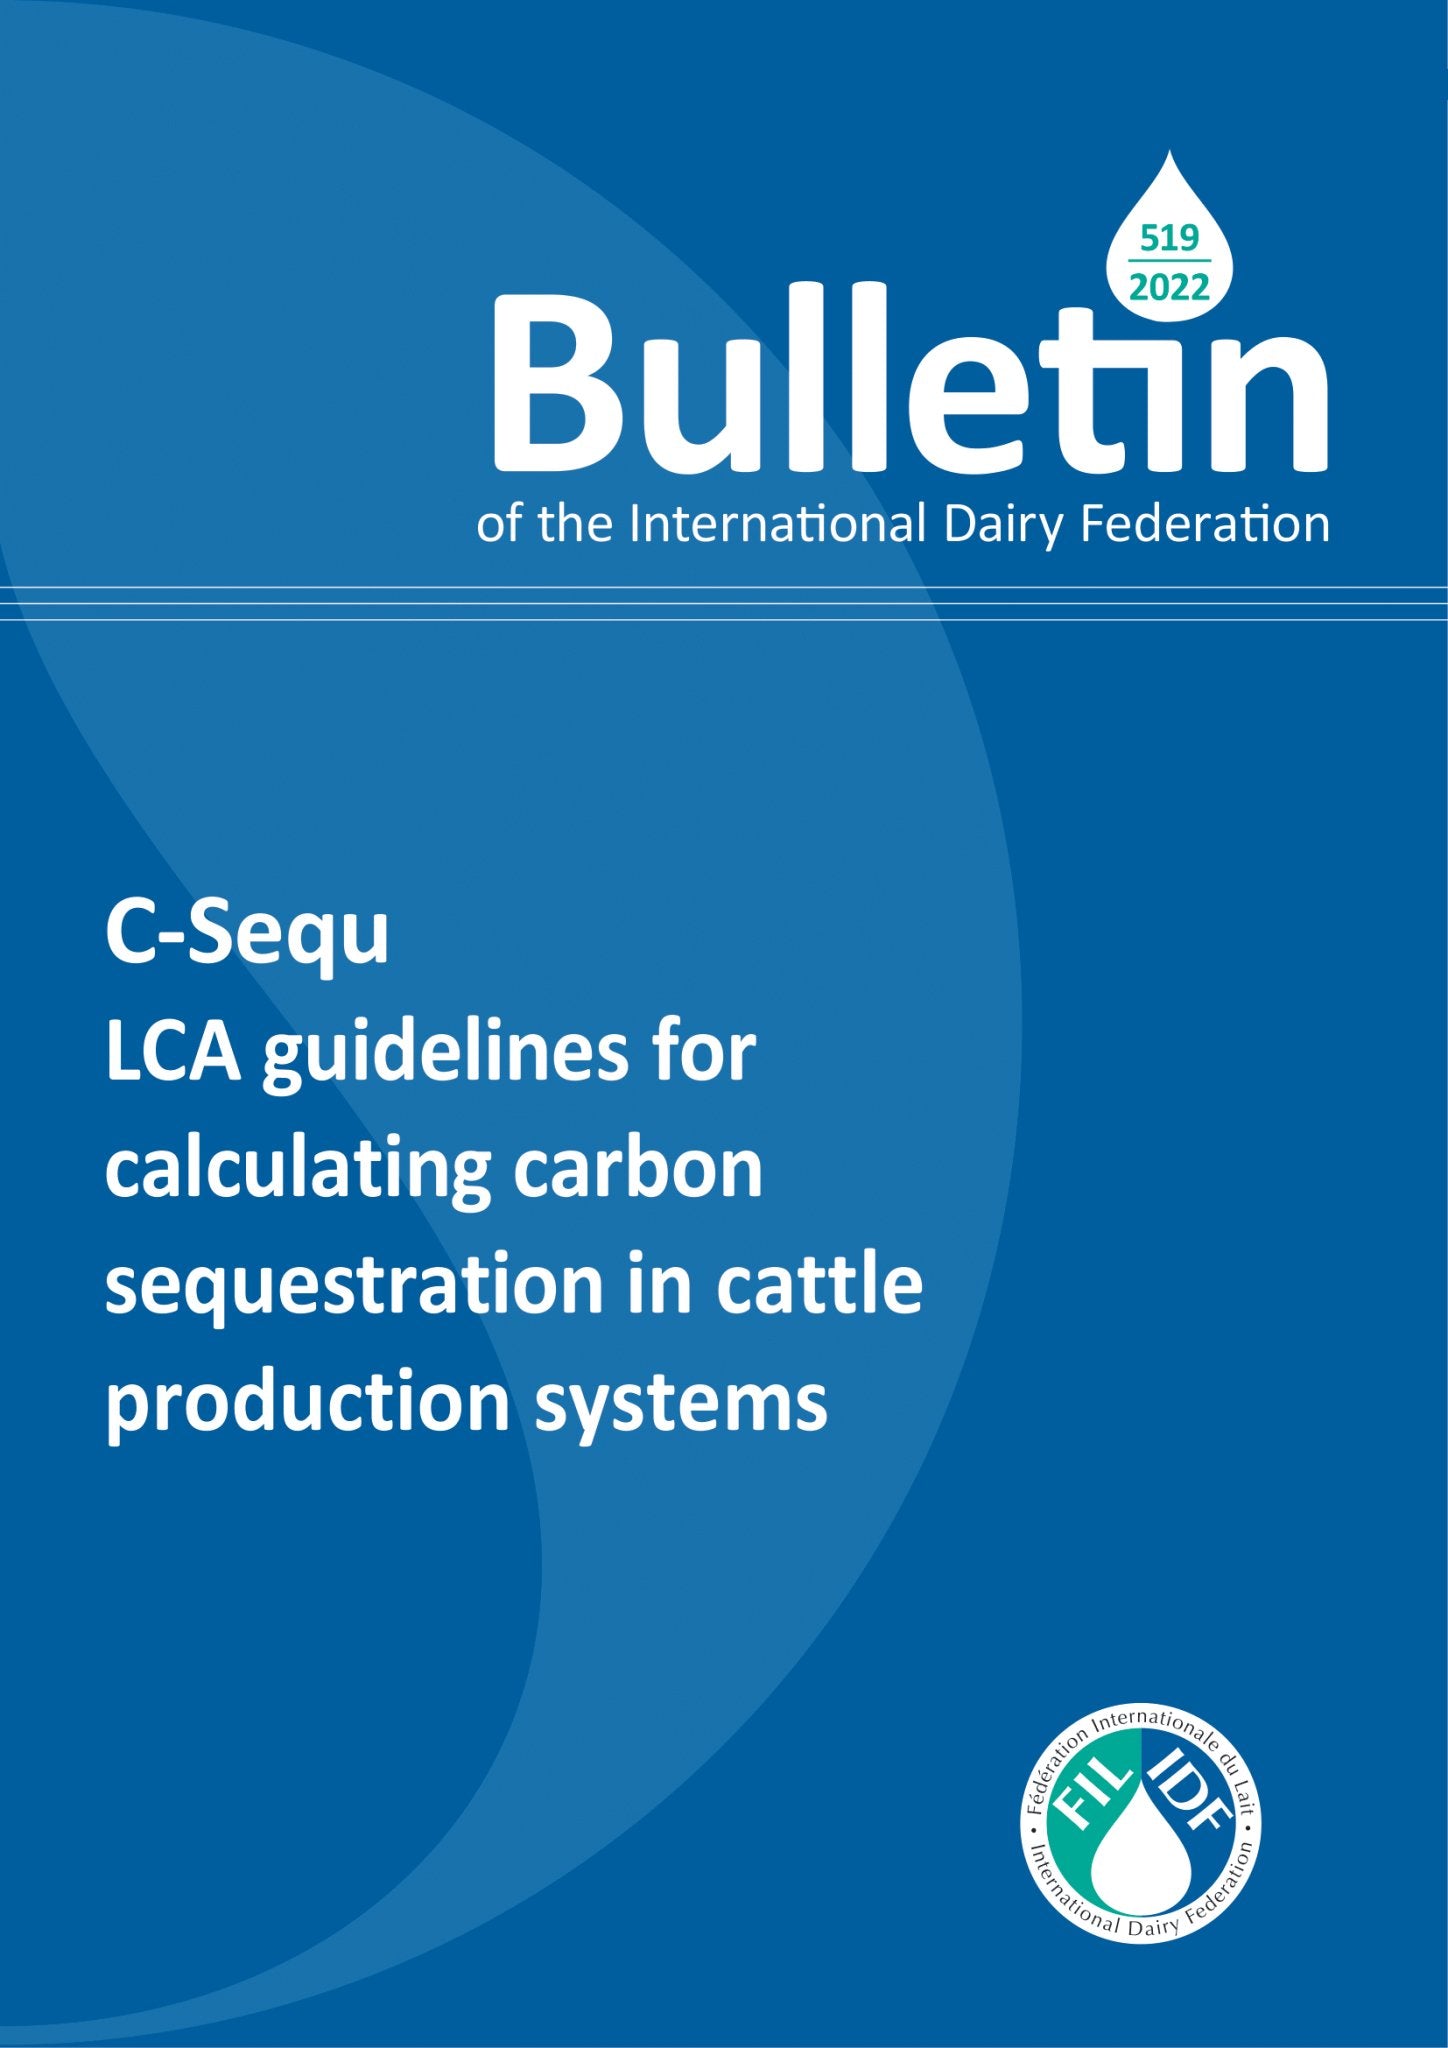 Bulletin of the IDF N°519/2022: C-Sequ LCA guidelines for calculating carbon sequestration in cattle production systems - FIL-IDF